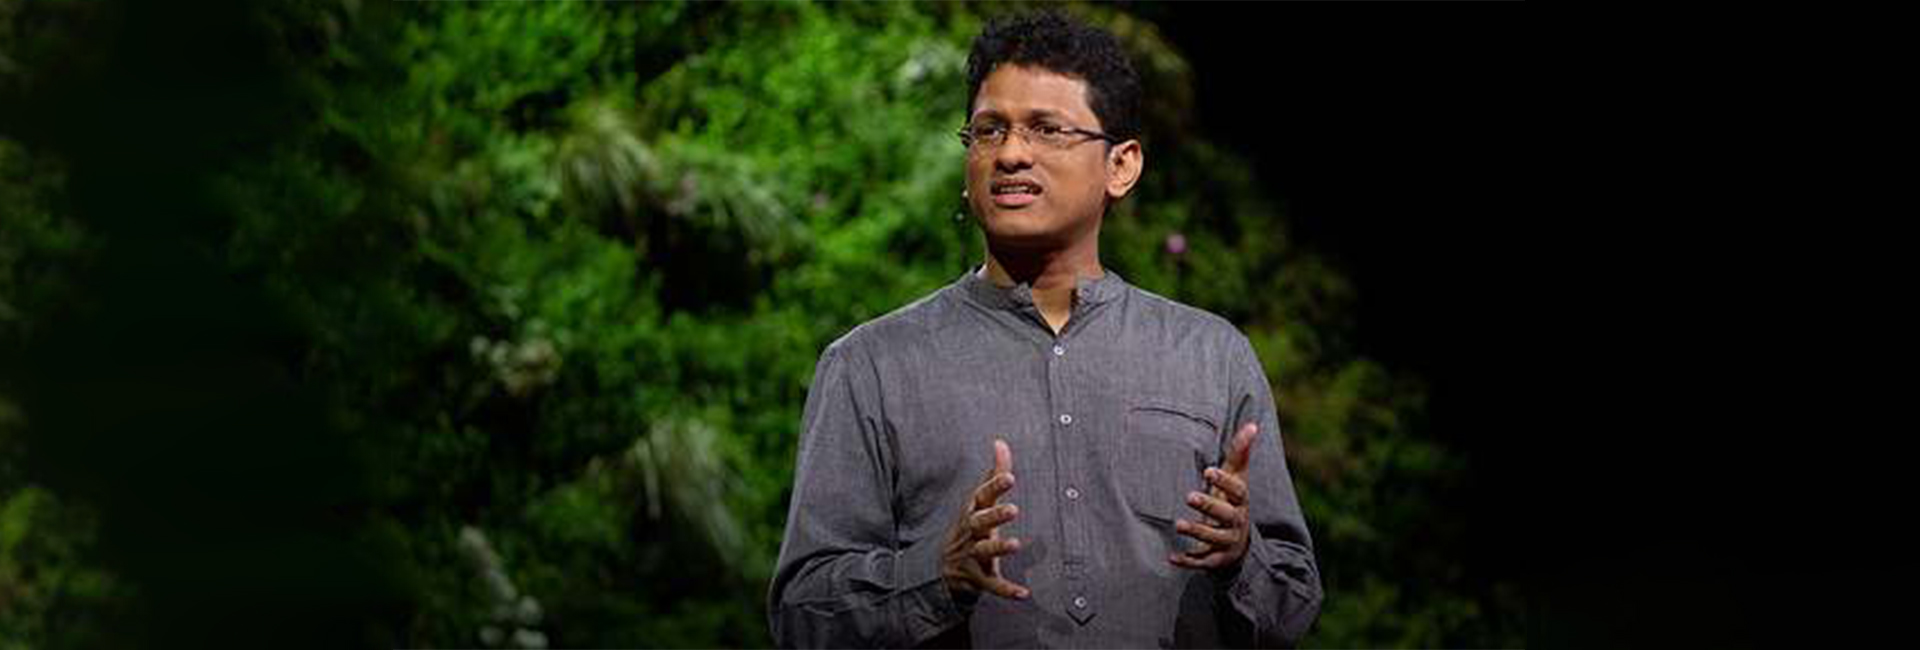 Sathya Raghu Mokkapati, the cofounder and president of Kheyti talks about climate risks and how 'Greenhouse-in-a-Box' is empowering farmers in India.